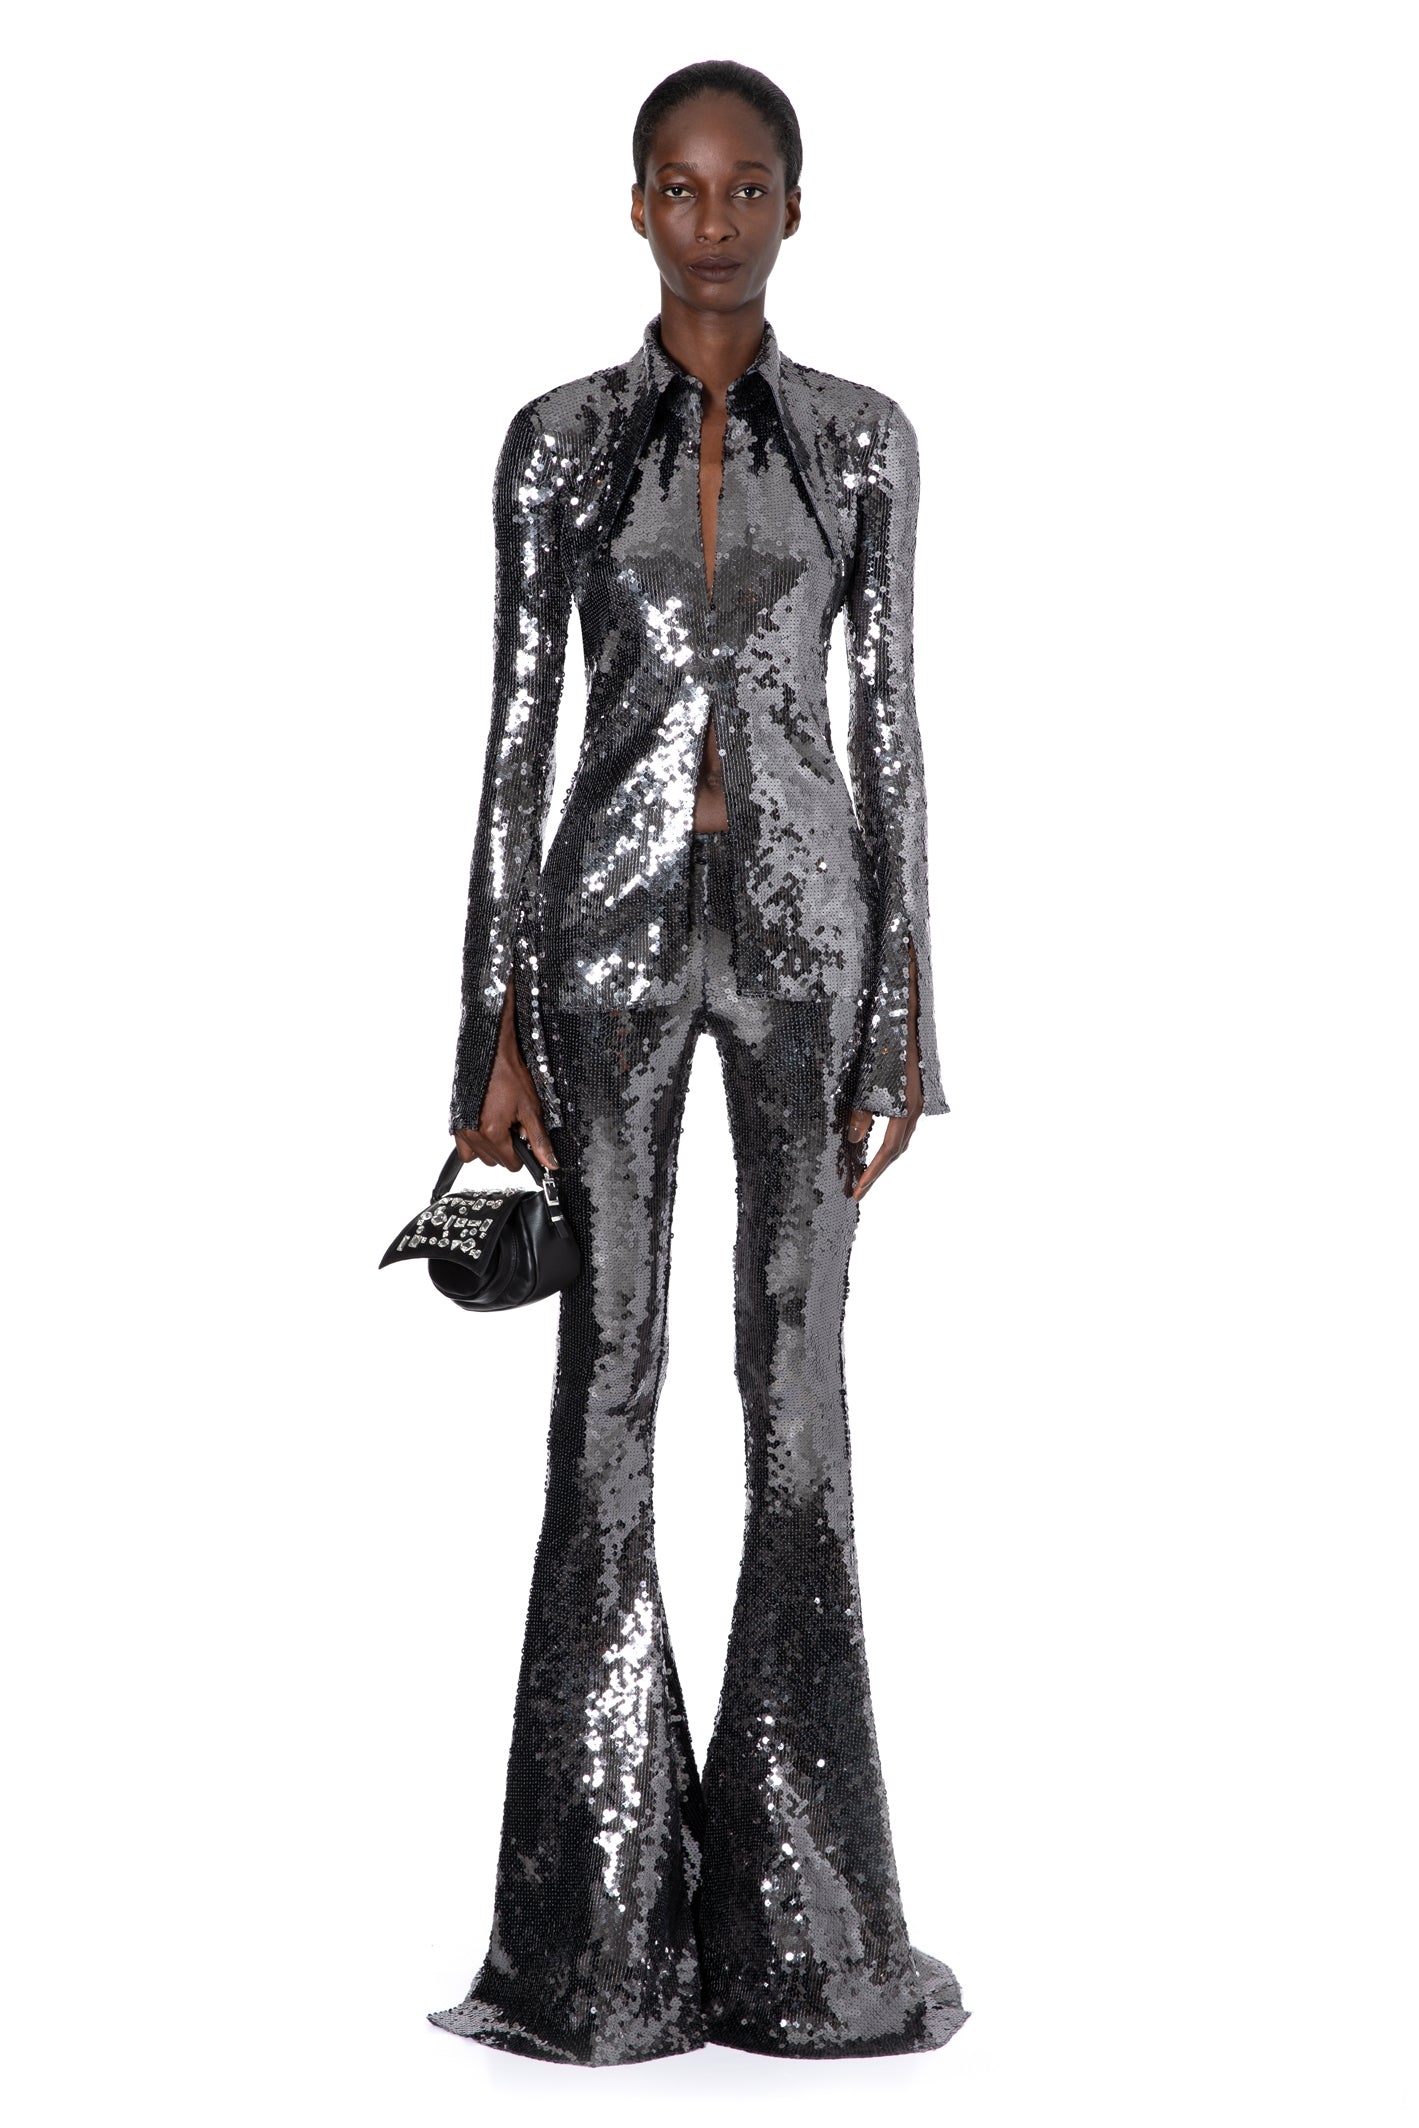 OPALA SEQUIN SHIRT IN ANTHRACITE SEQUIN, 10 – 16Arlington